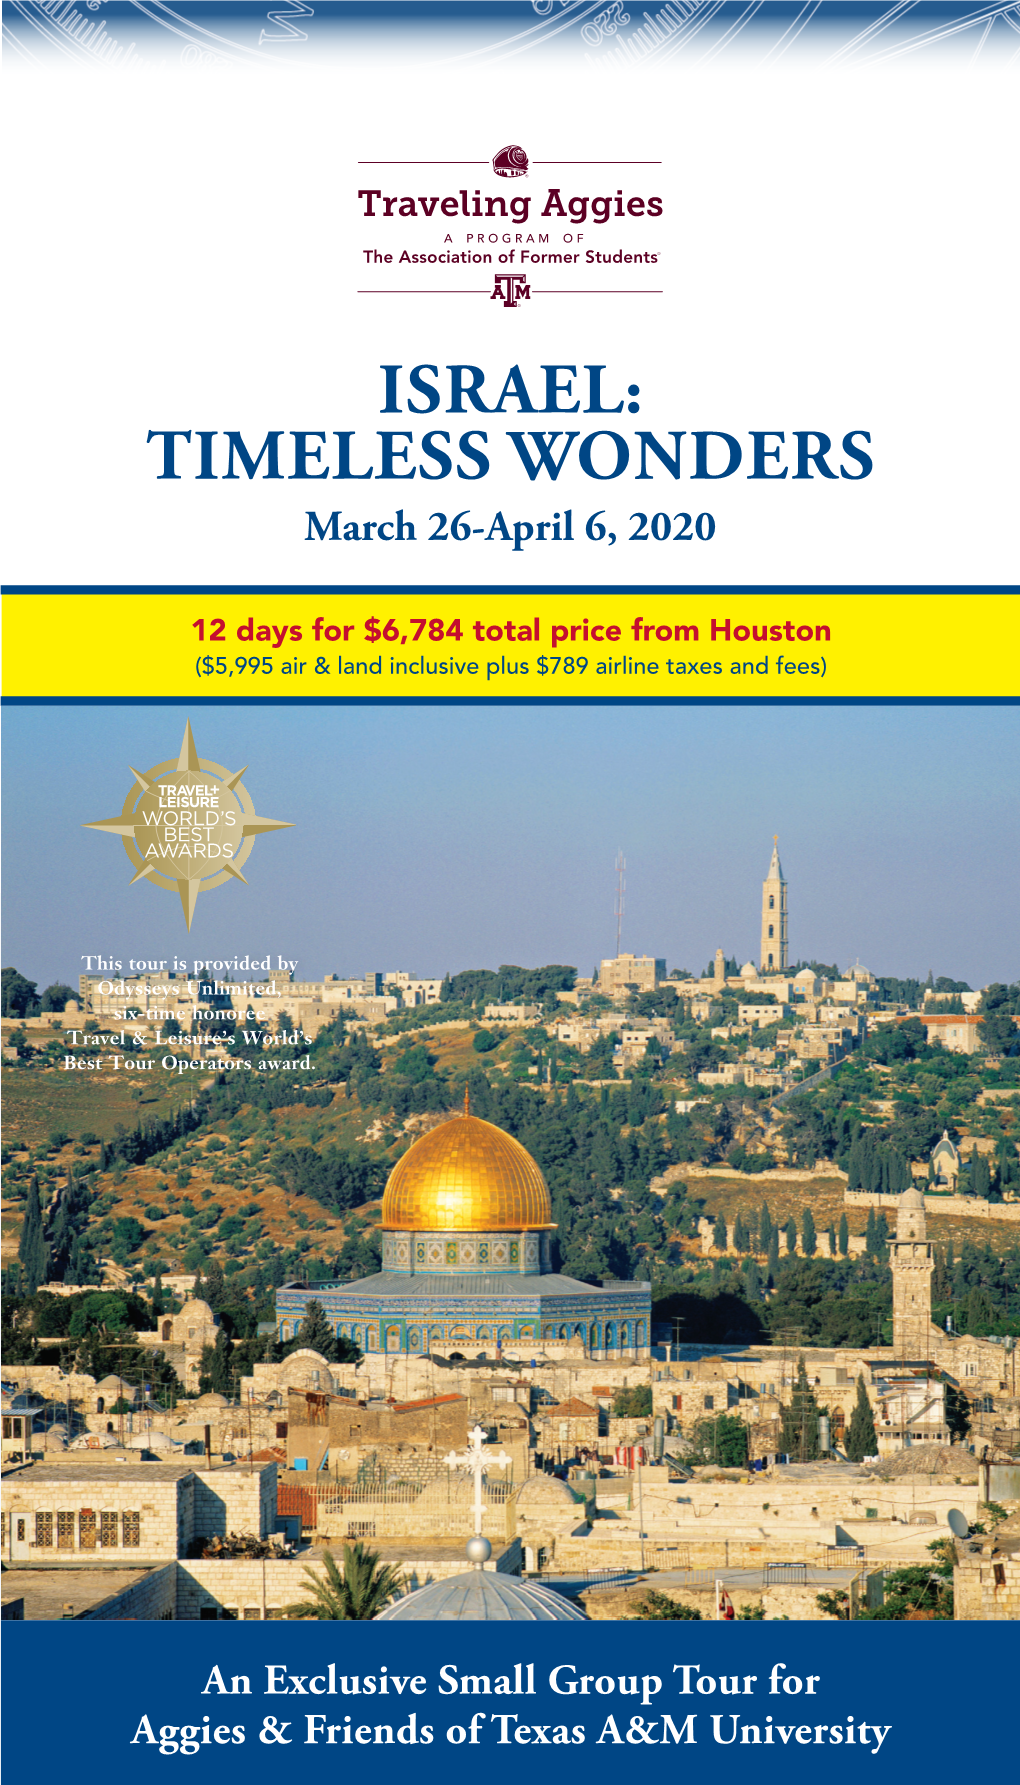 ISRAEL: TIMELESS WONDERS March 26-April 6, 2020